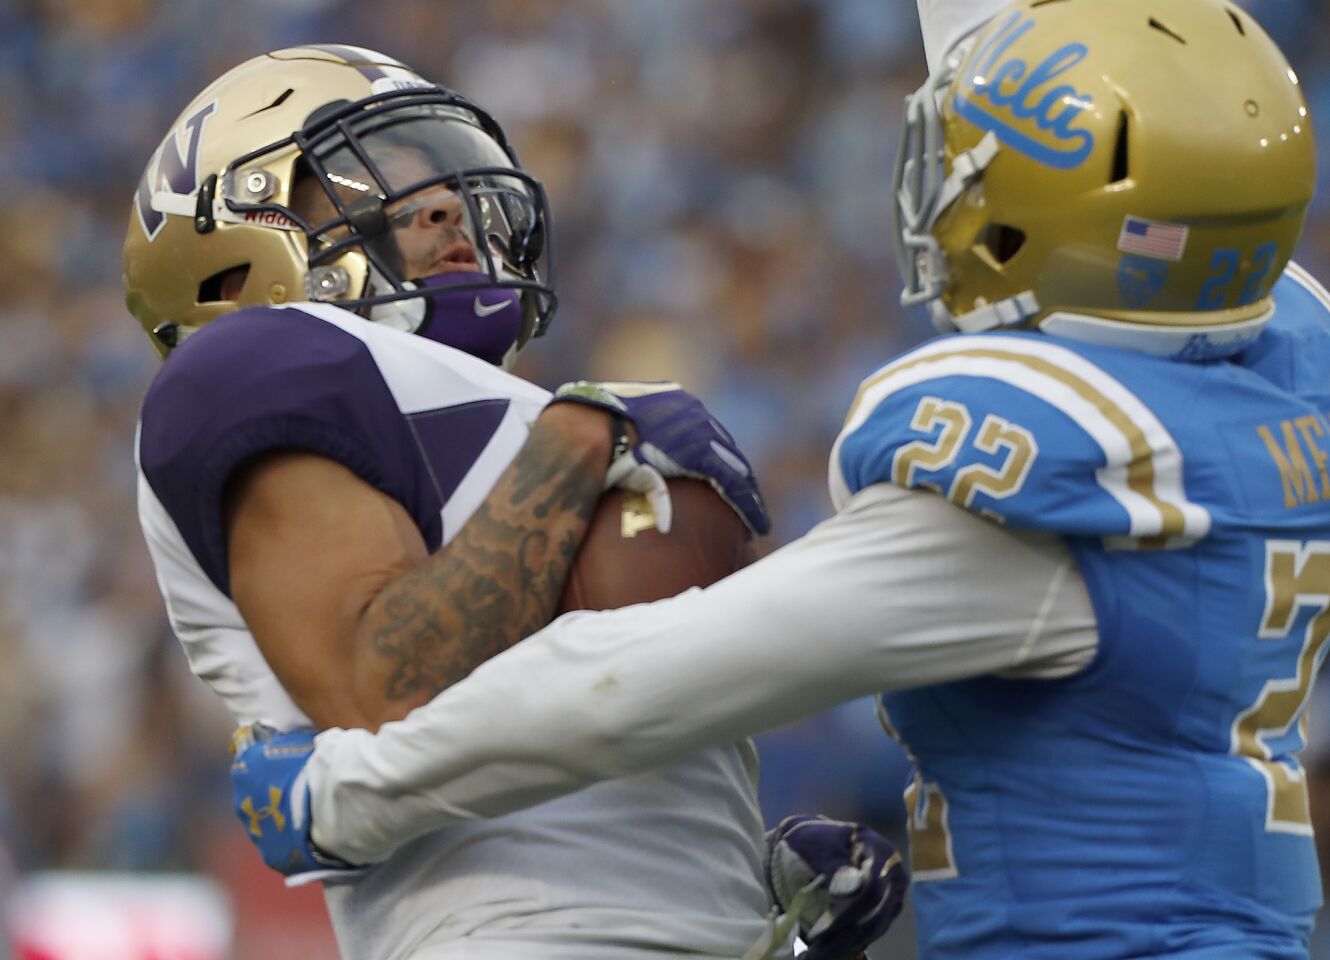 Washington wide receiver Aaron Fuller makes a touchdown catch in front of UCLA defensive back Nate Meadors in the first quarter on Saturday at the Rose Bowl.